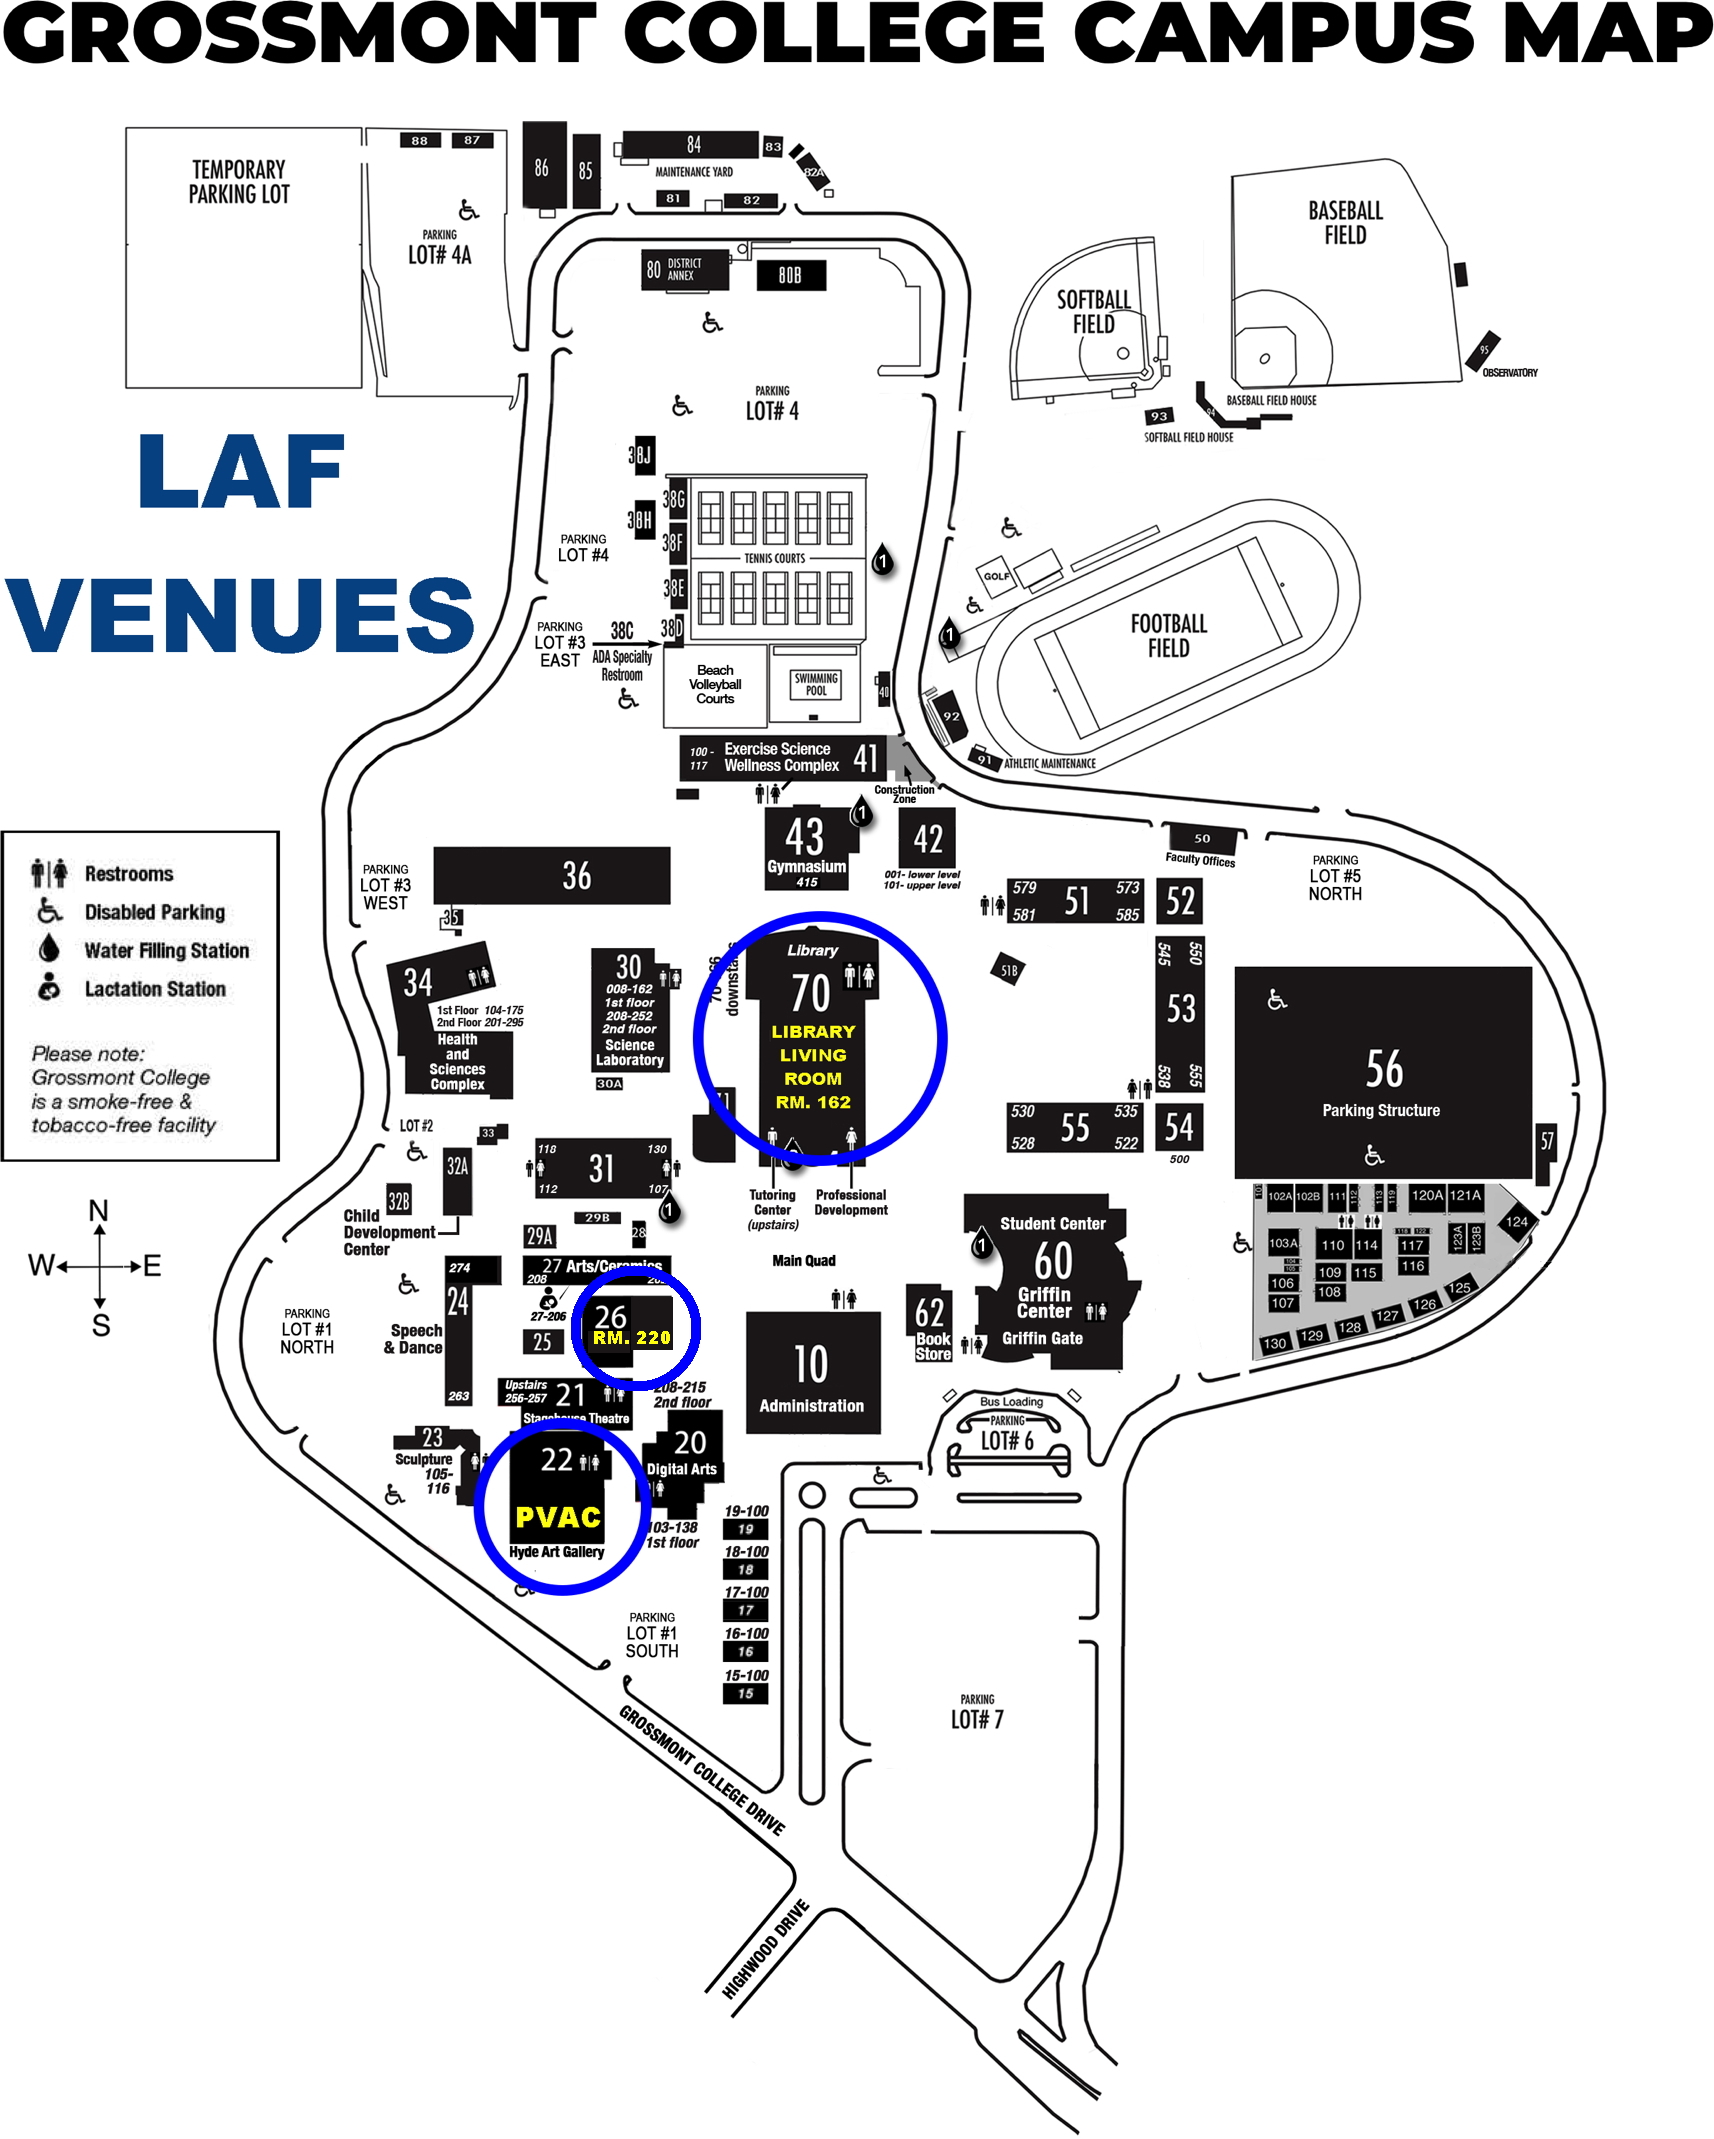 a campus map identify the venues for this year's LAF events